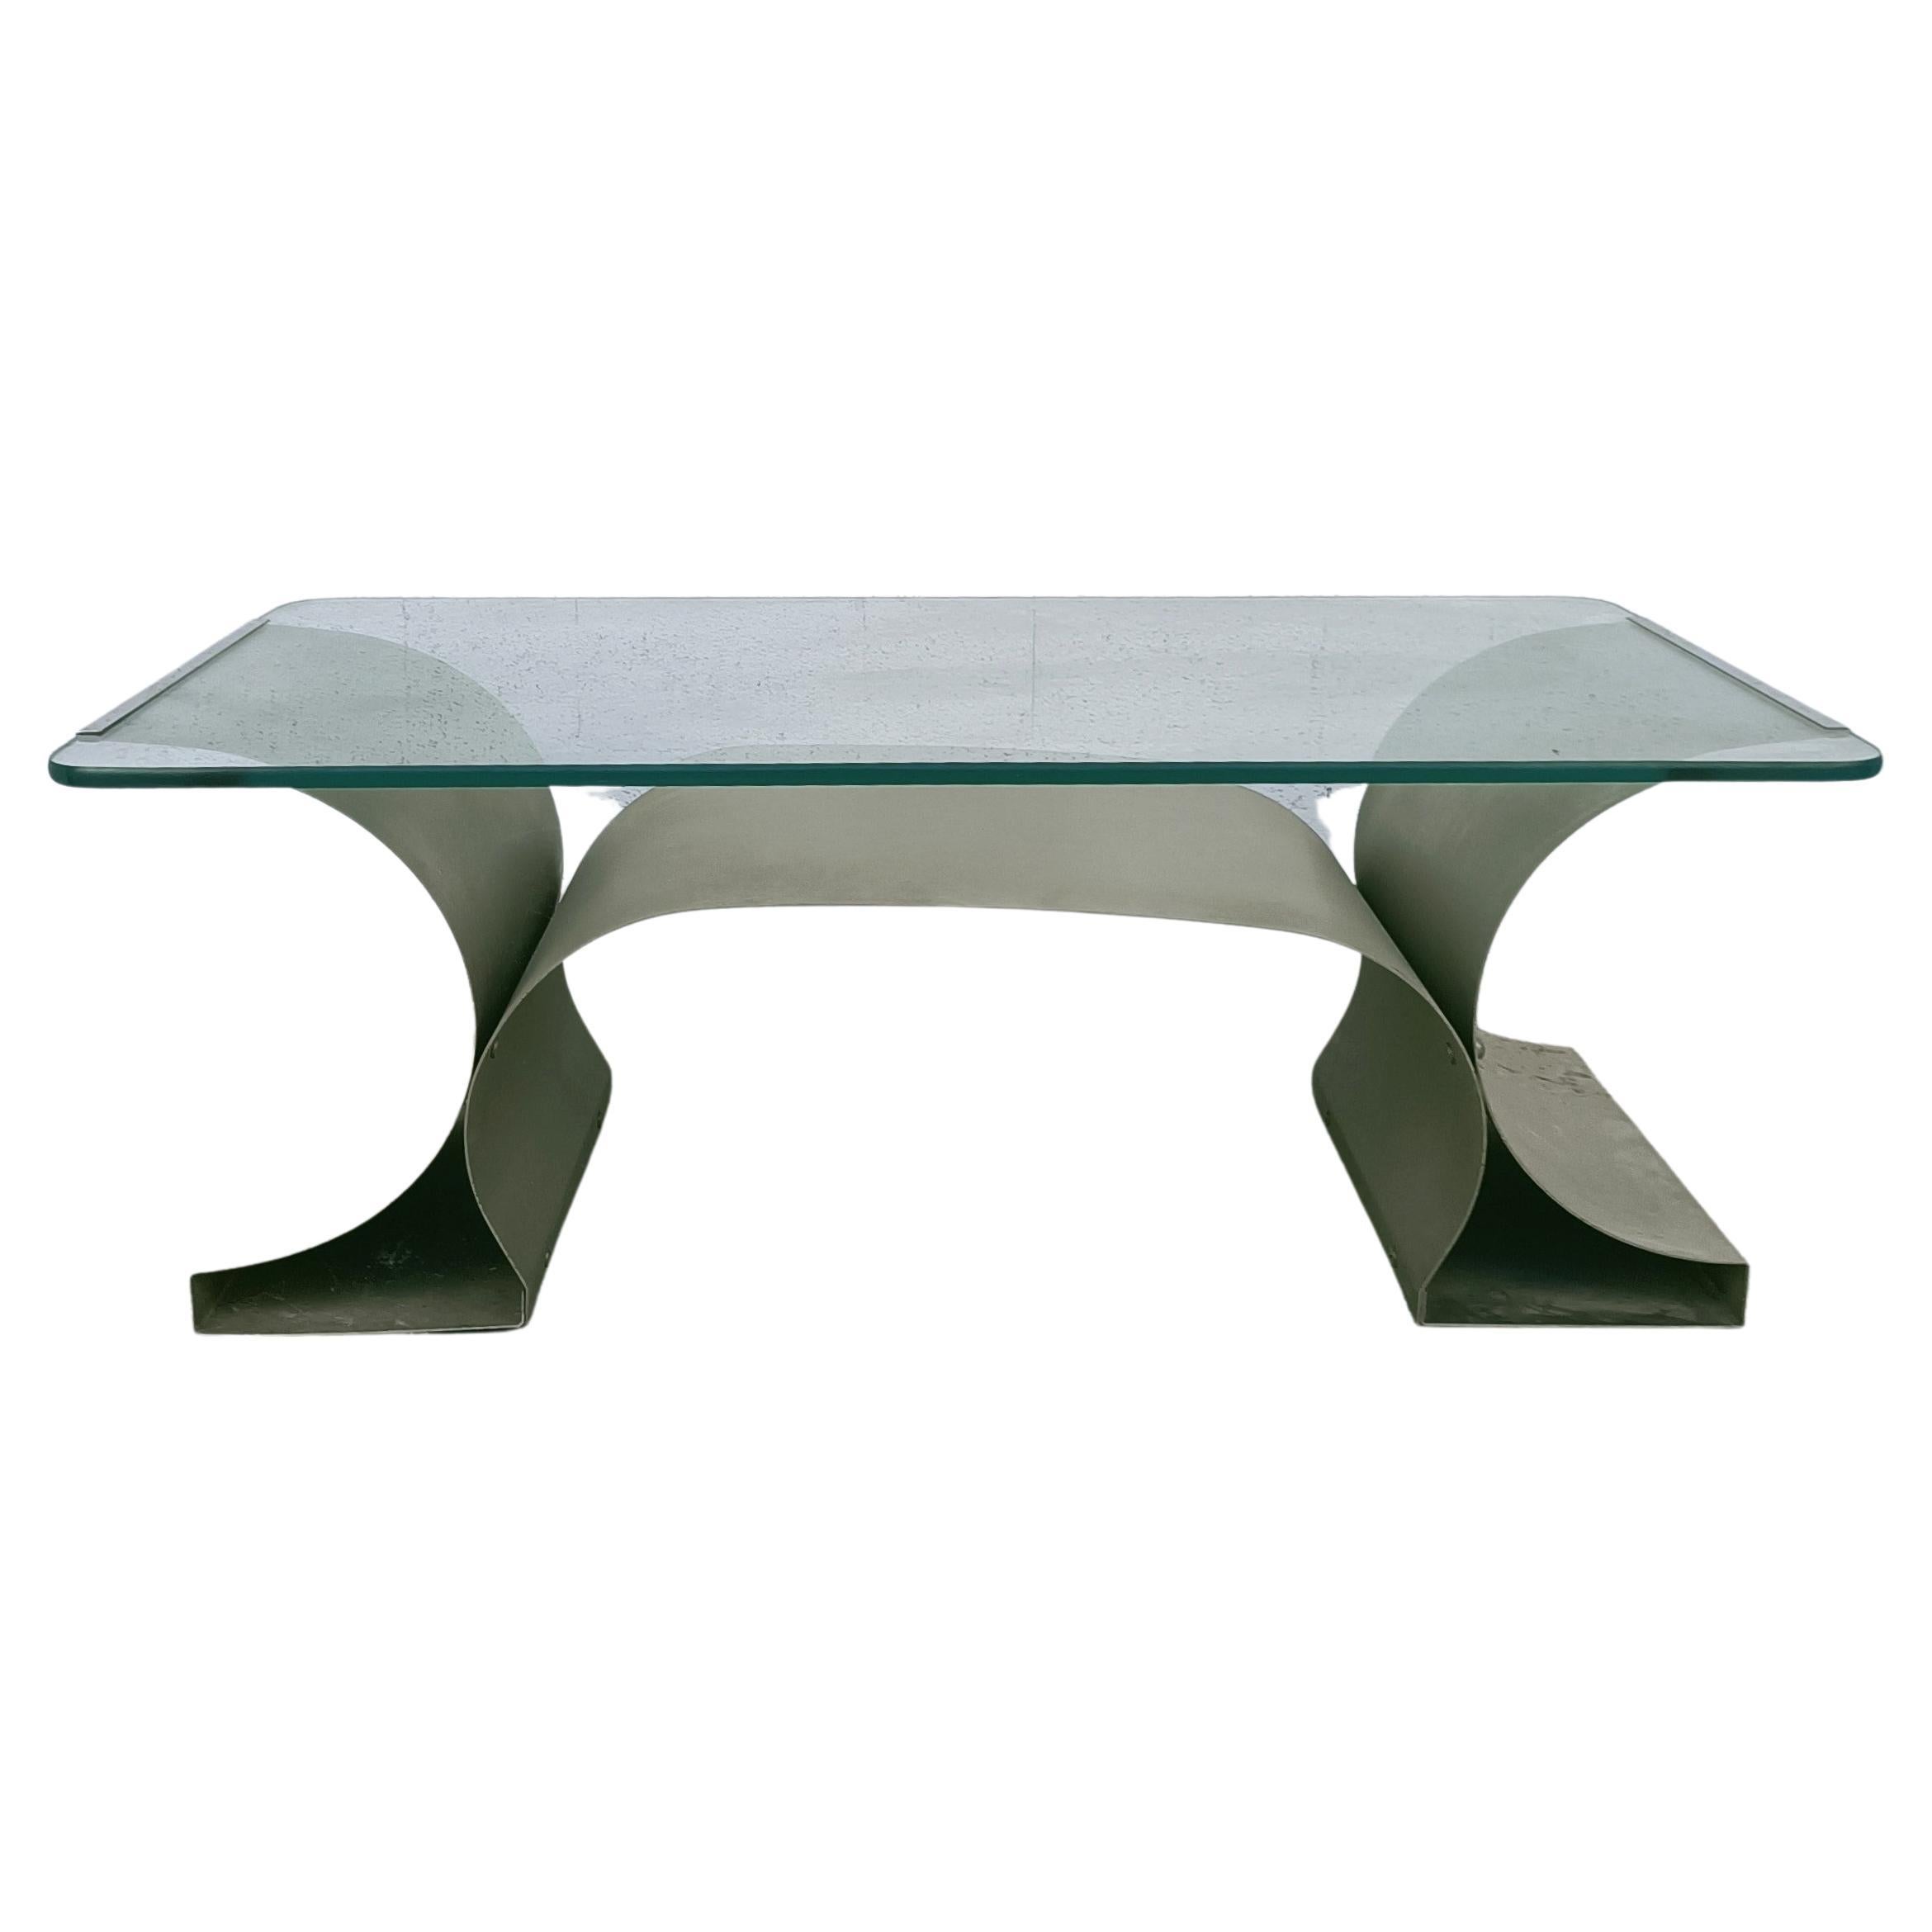 Stainless Steel and Glass Coffee Table by Francois Monnet for Kappa 70s